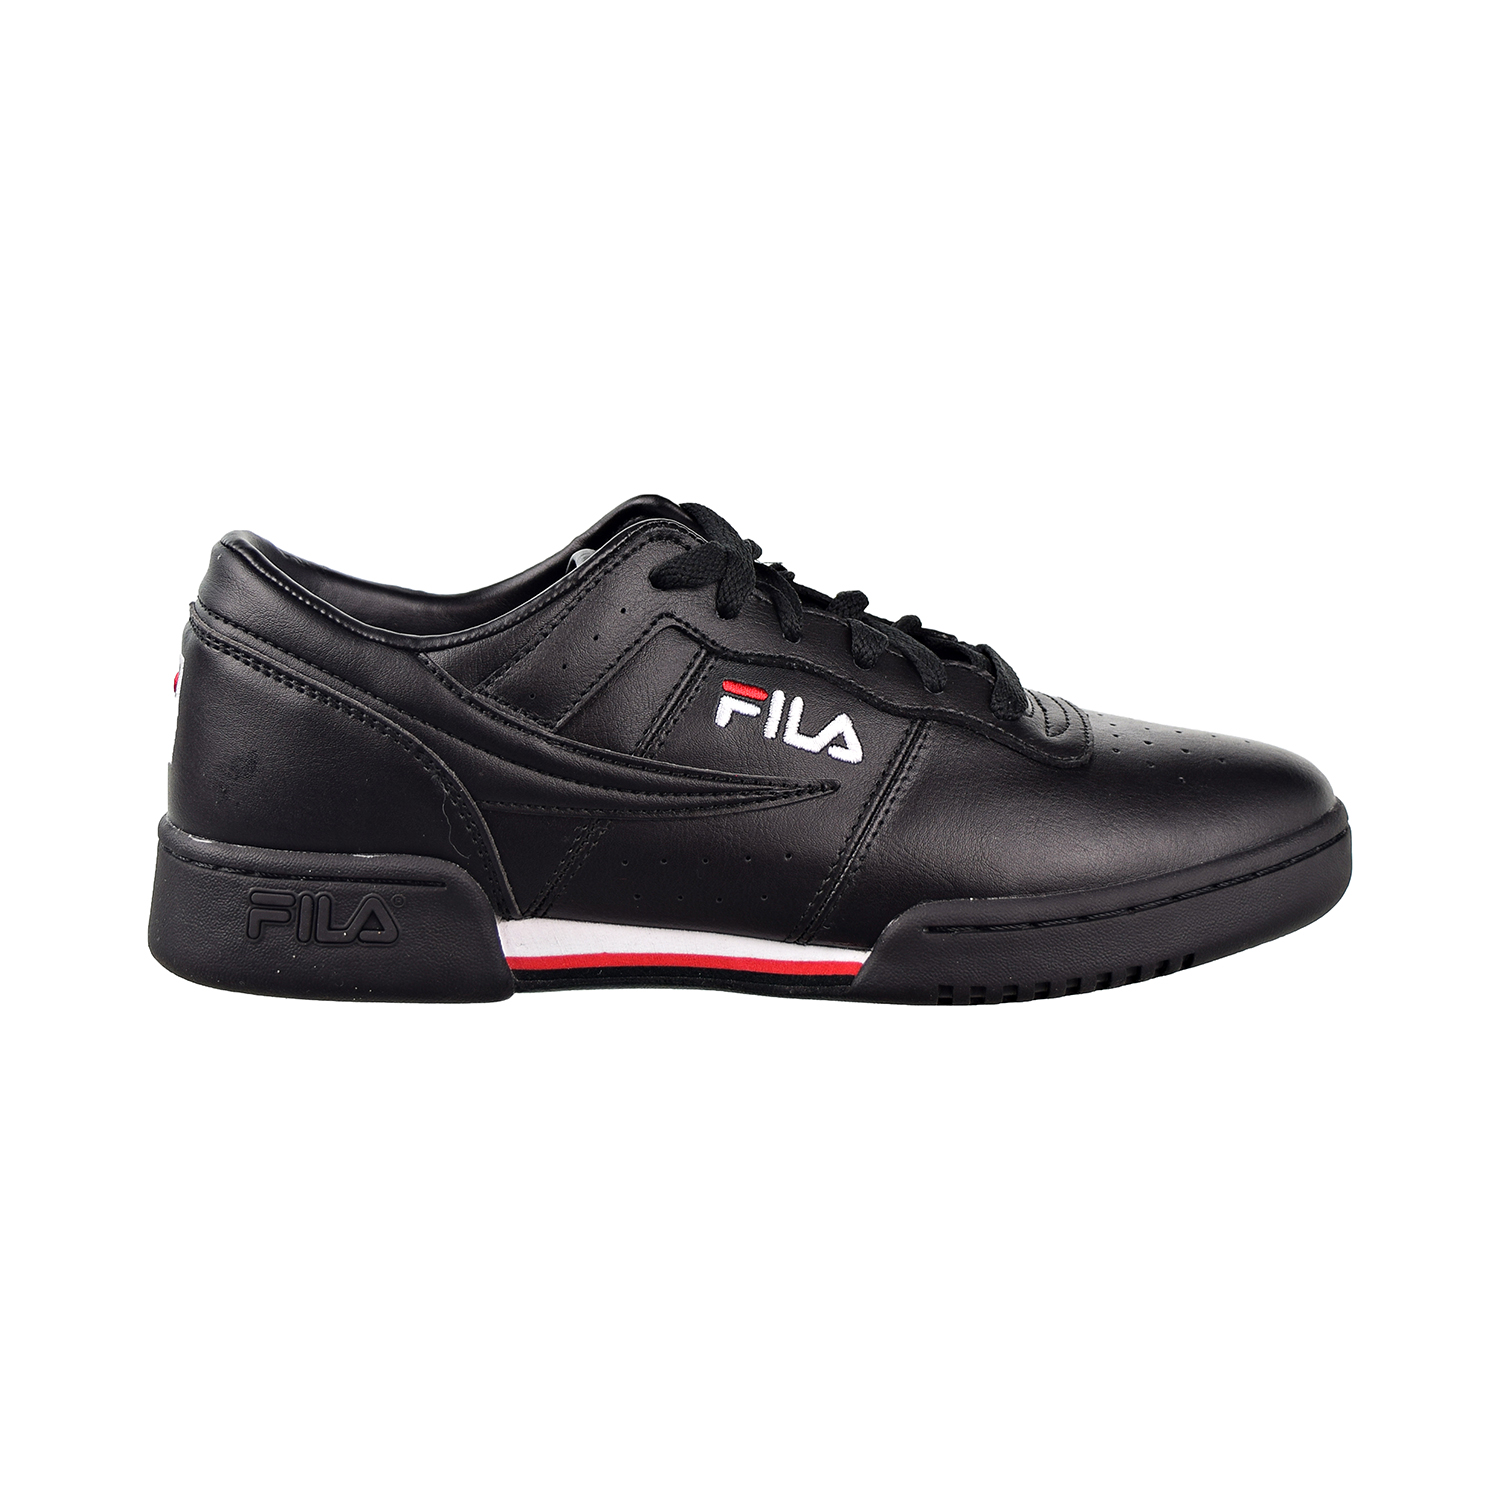 Sneakers Black-White-Red 11F16LT-970 